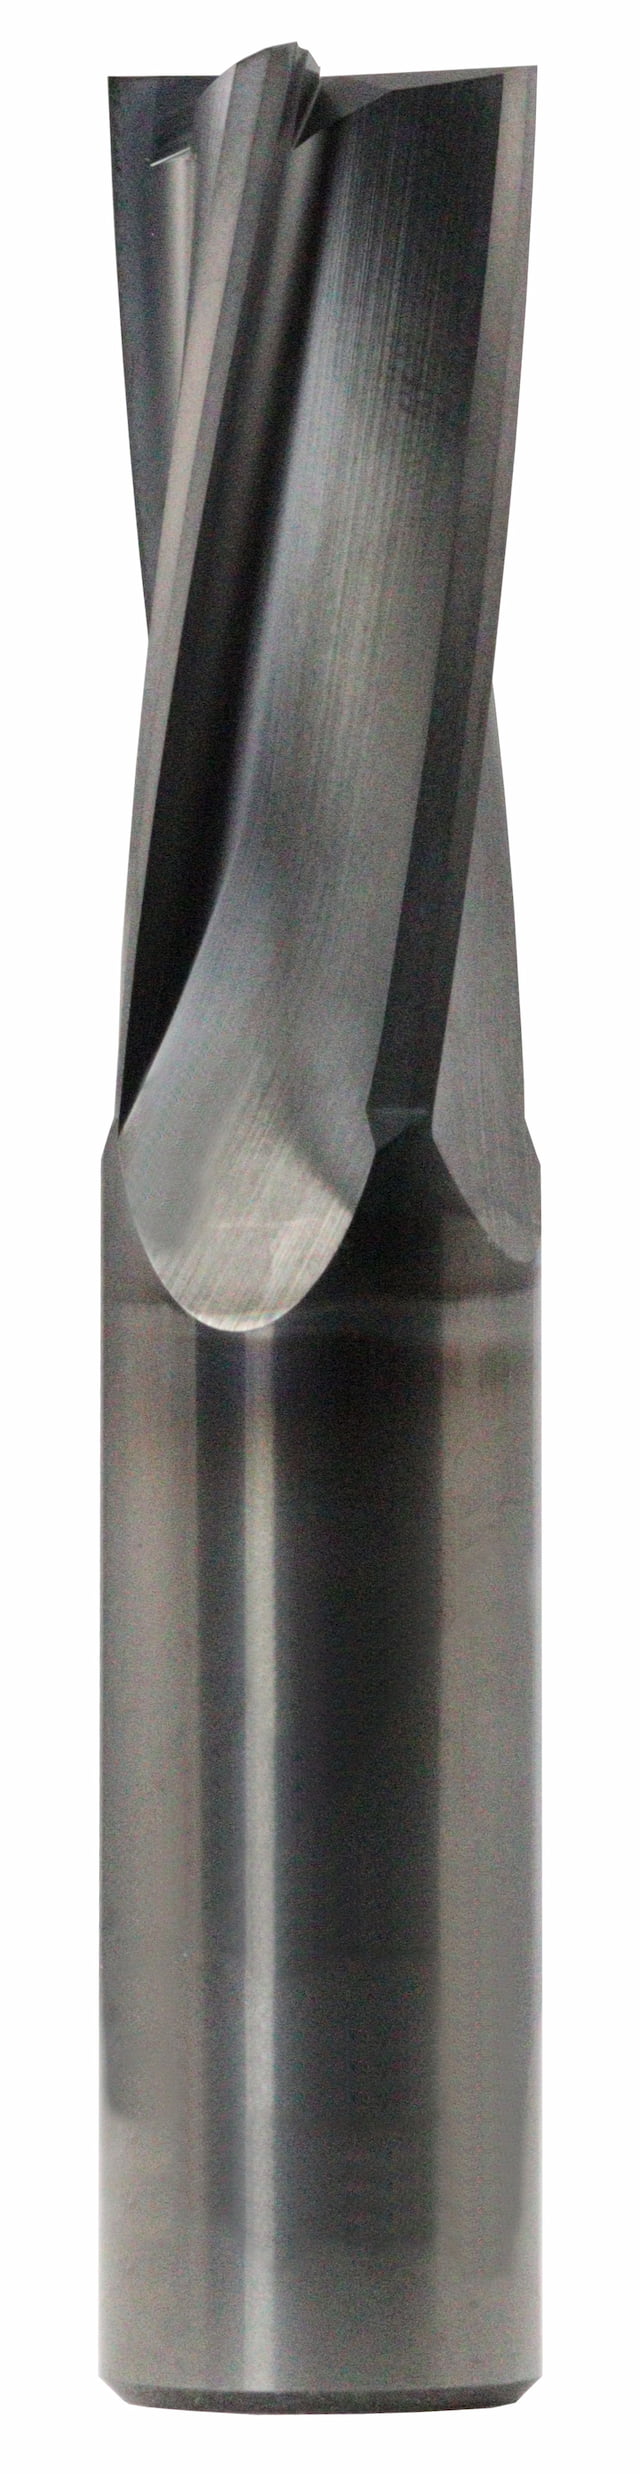 12.00mm Dia, 4 Flute, Square End End Mill - 83063